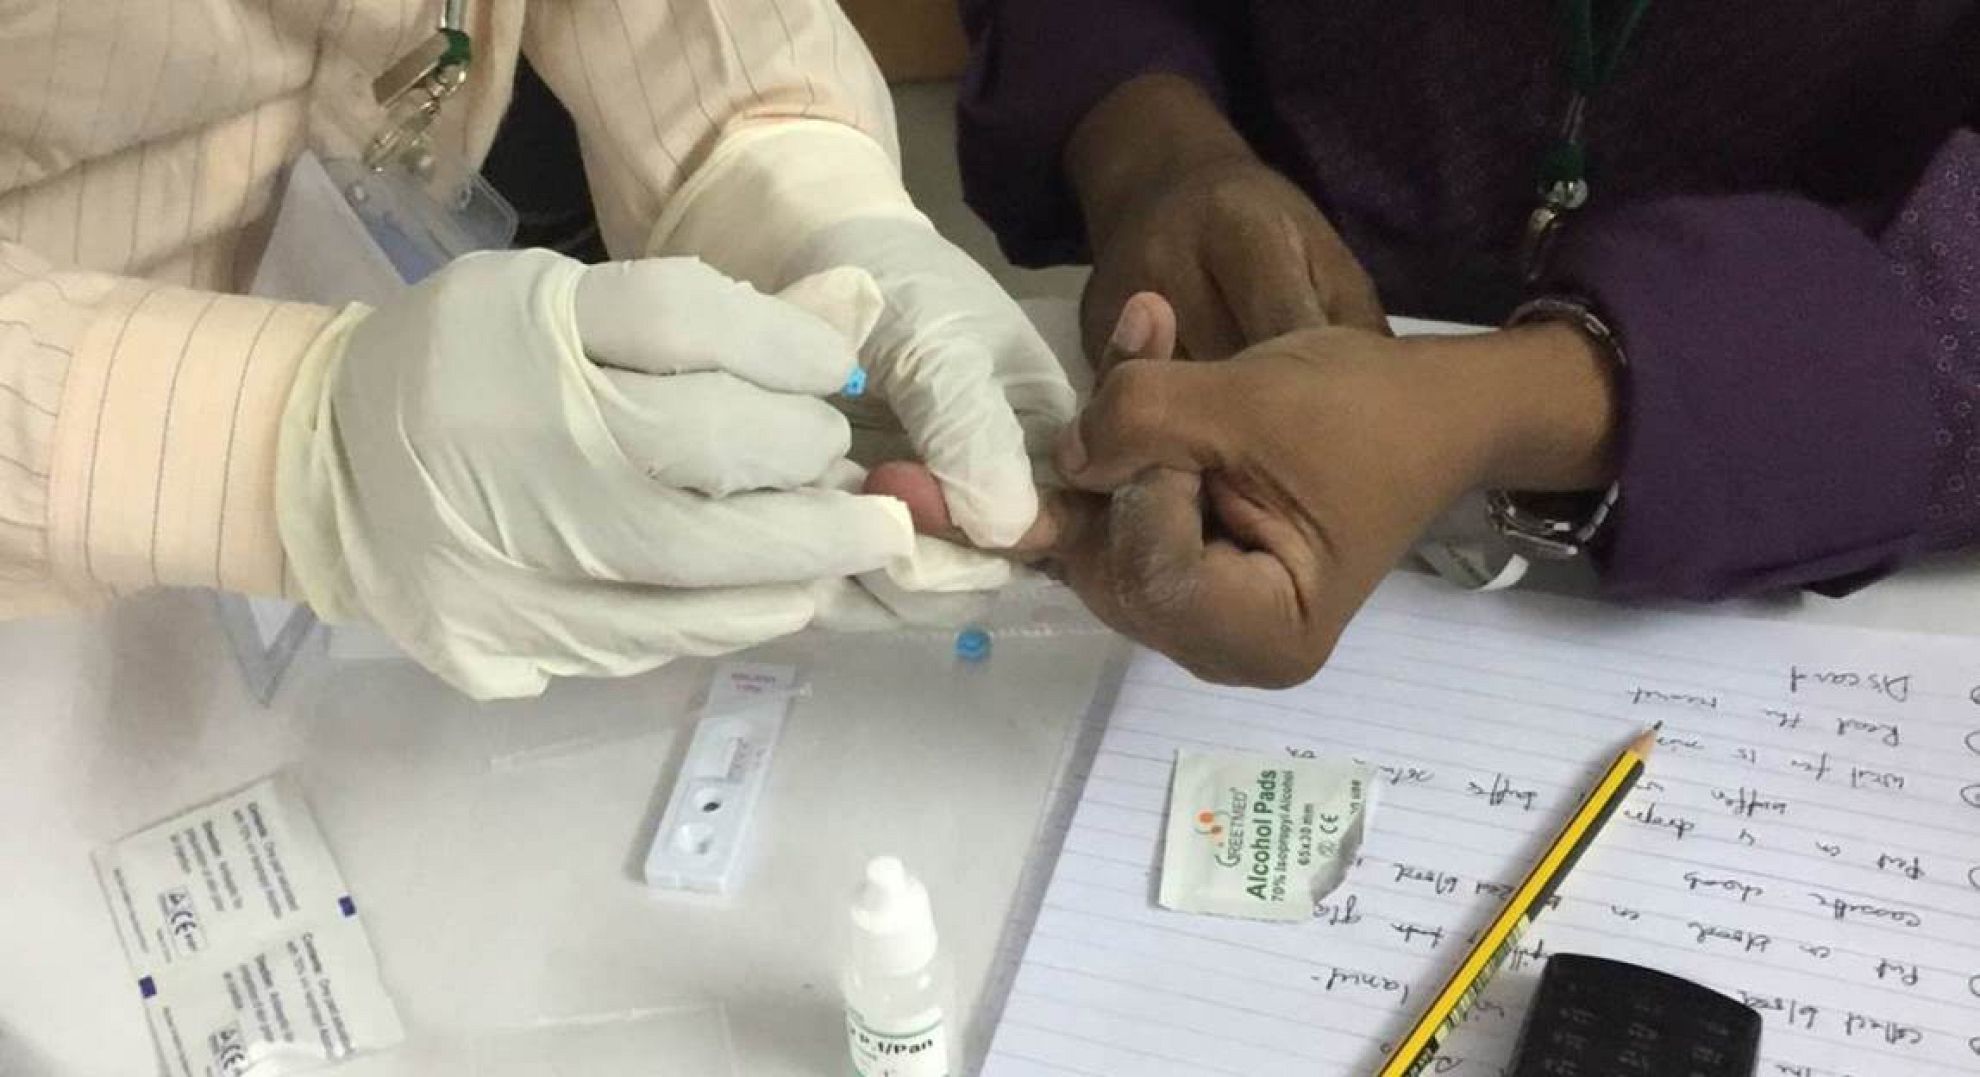 Latest News Malaria consortium helps train health workers in bangladeshi area with highest malaria transmission